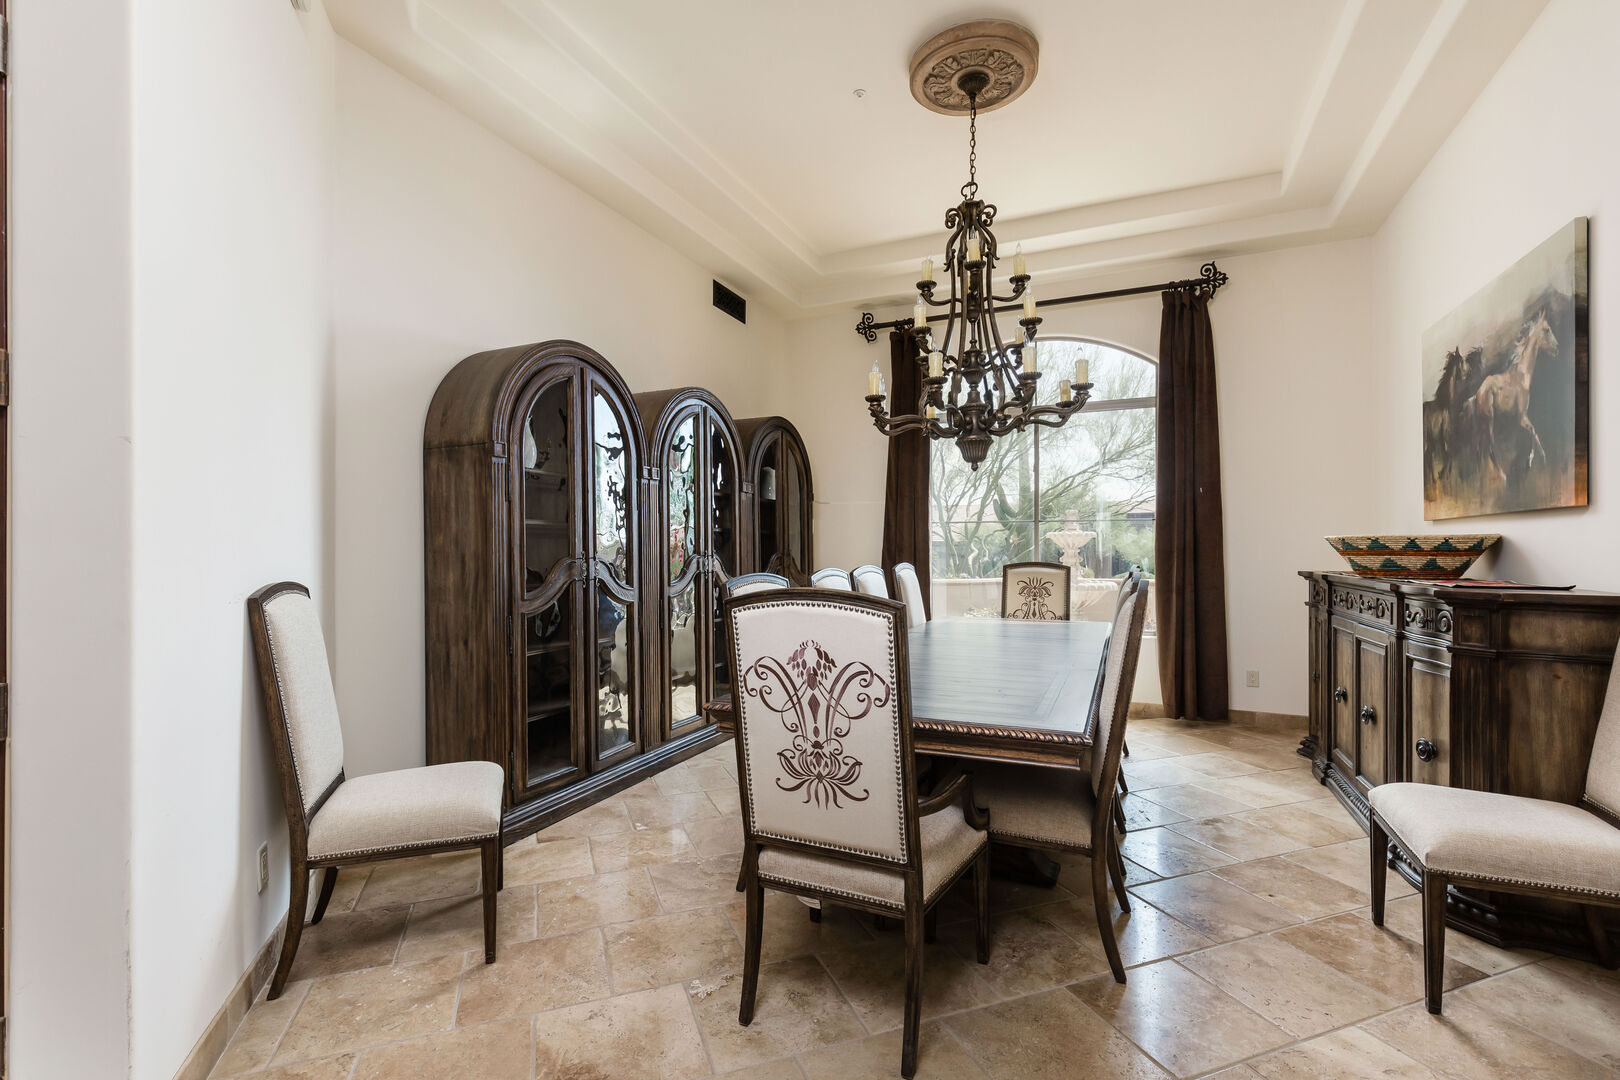 Formal Dining Room offering a table to accommodate 10 guests perfect for a holiday family feast.